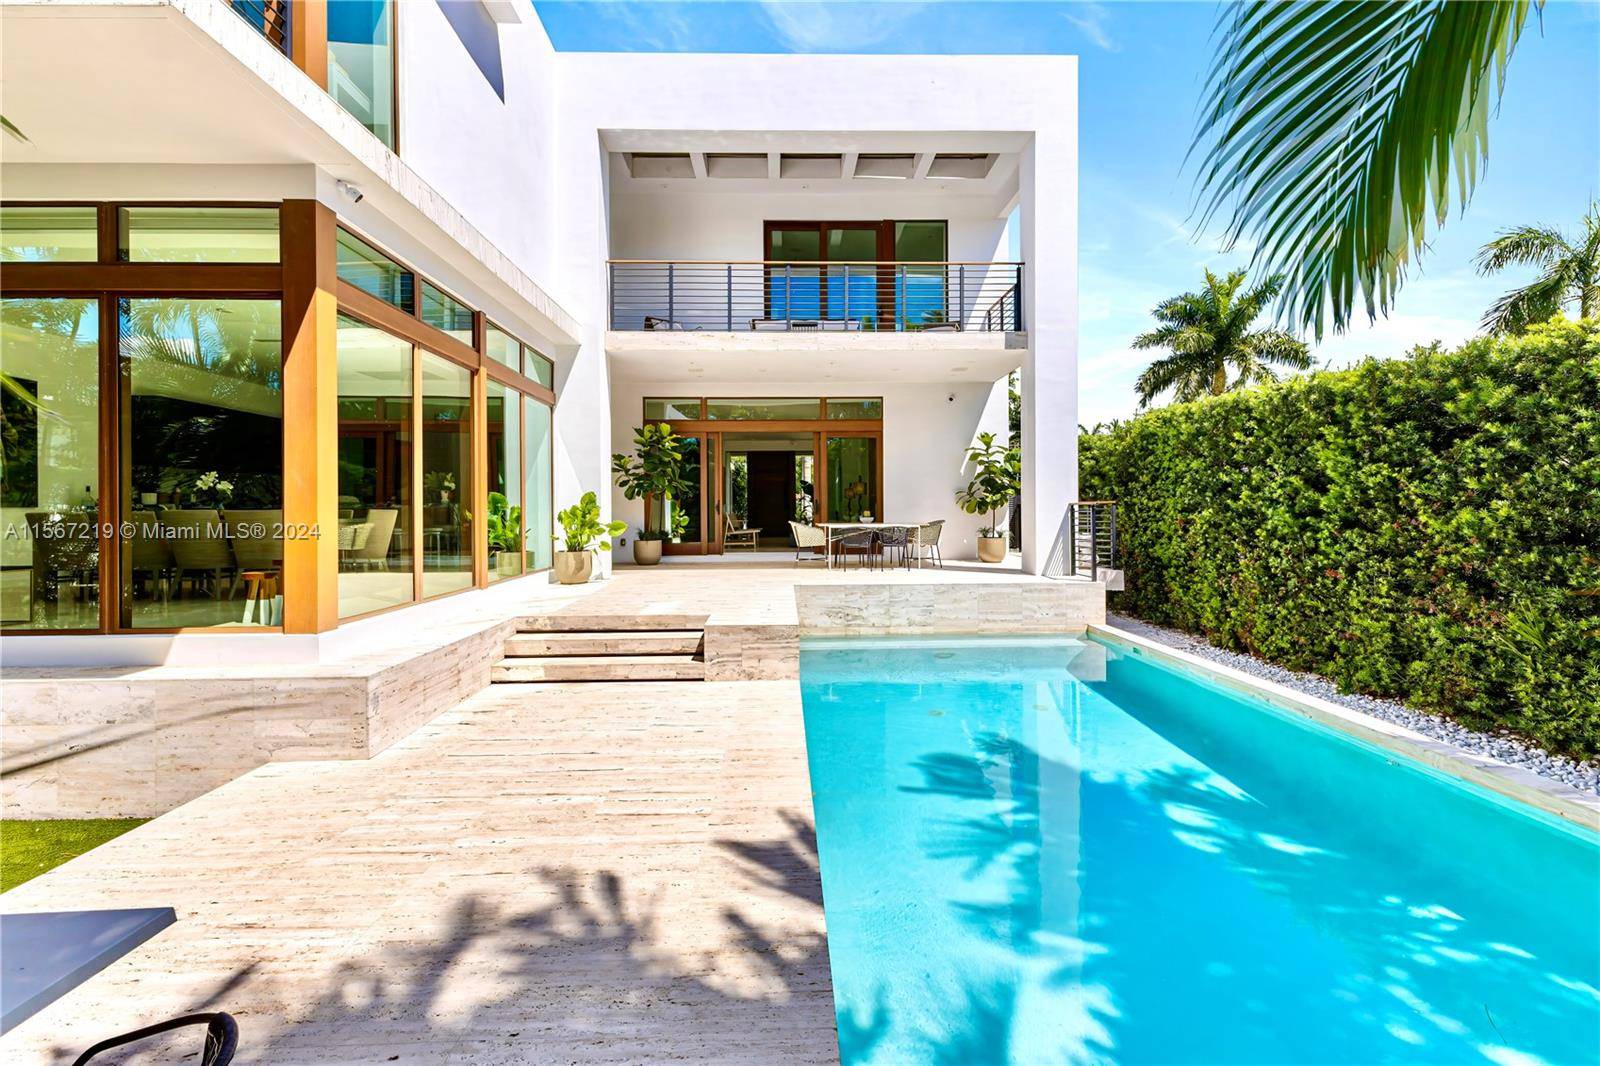 PRIME VENETIAN ISLANDS LOCATION, Newly constructed modern furnished home epitomizes contemporary elegance W inviting warmth.